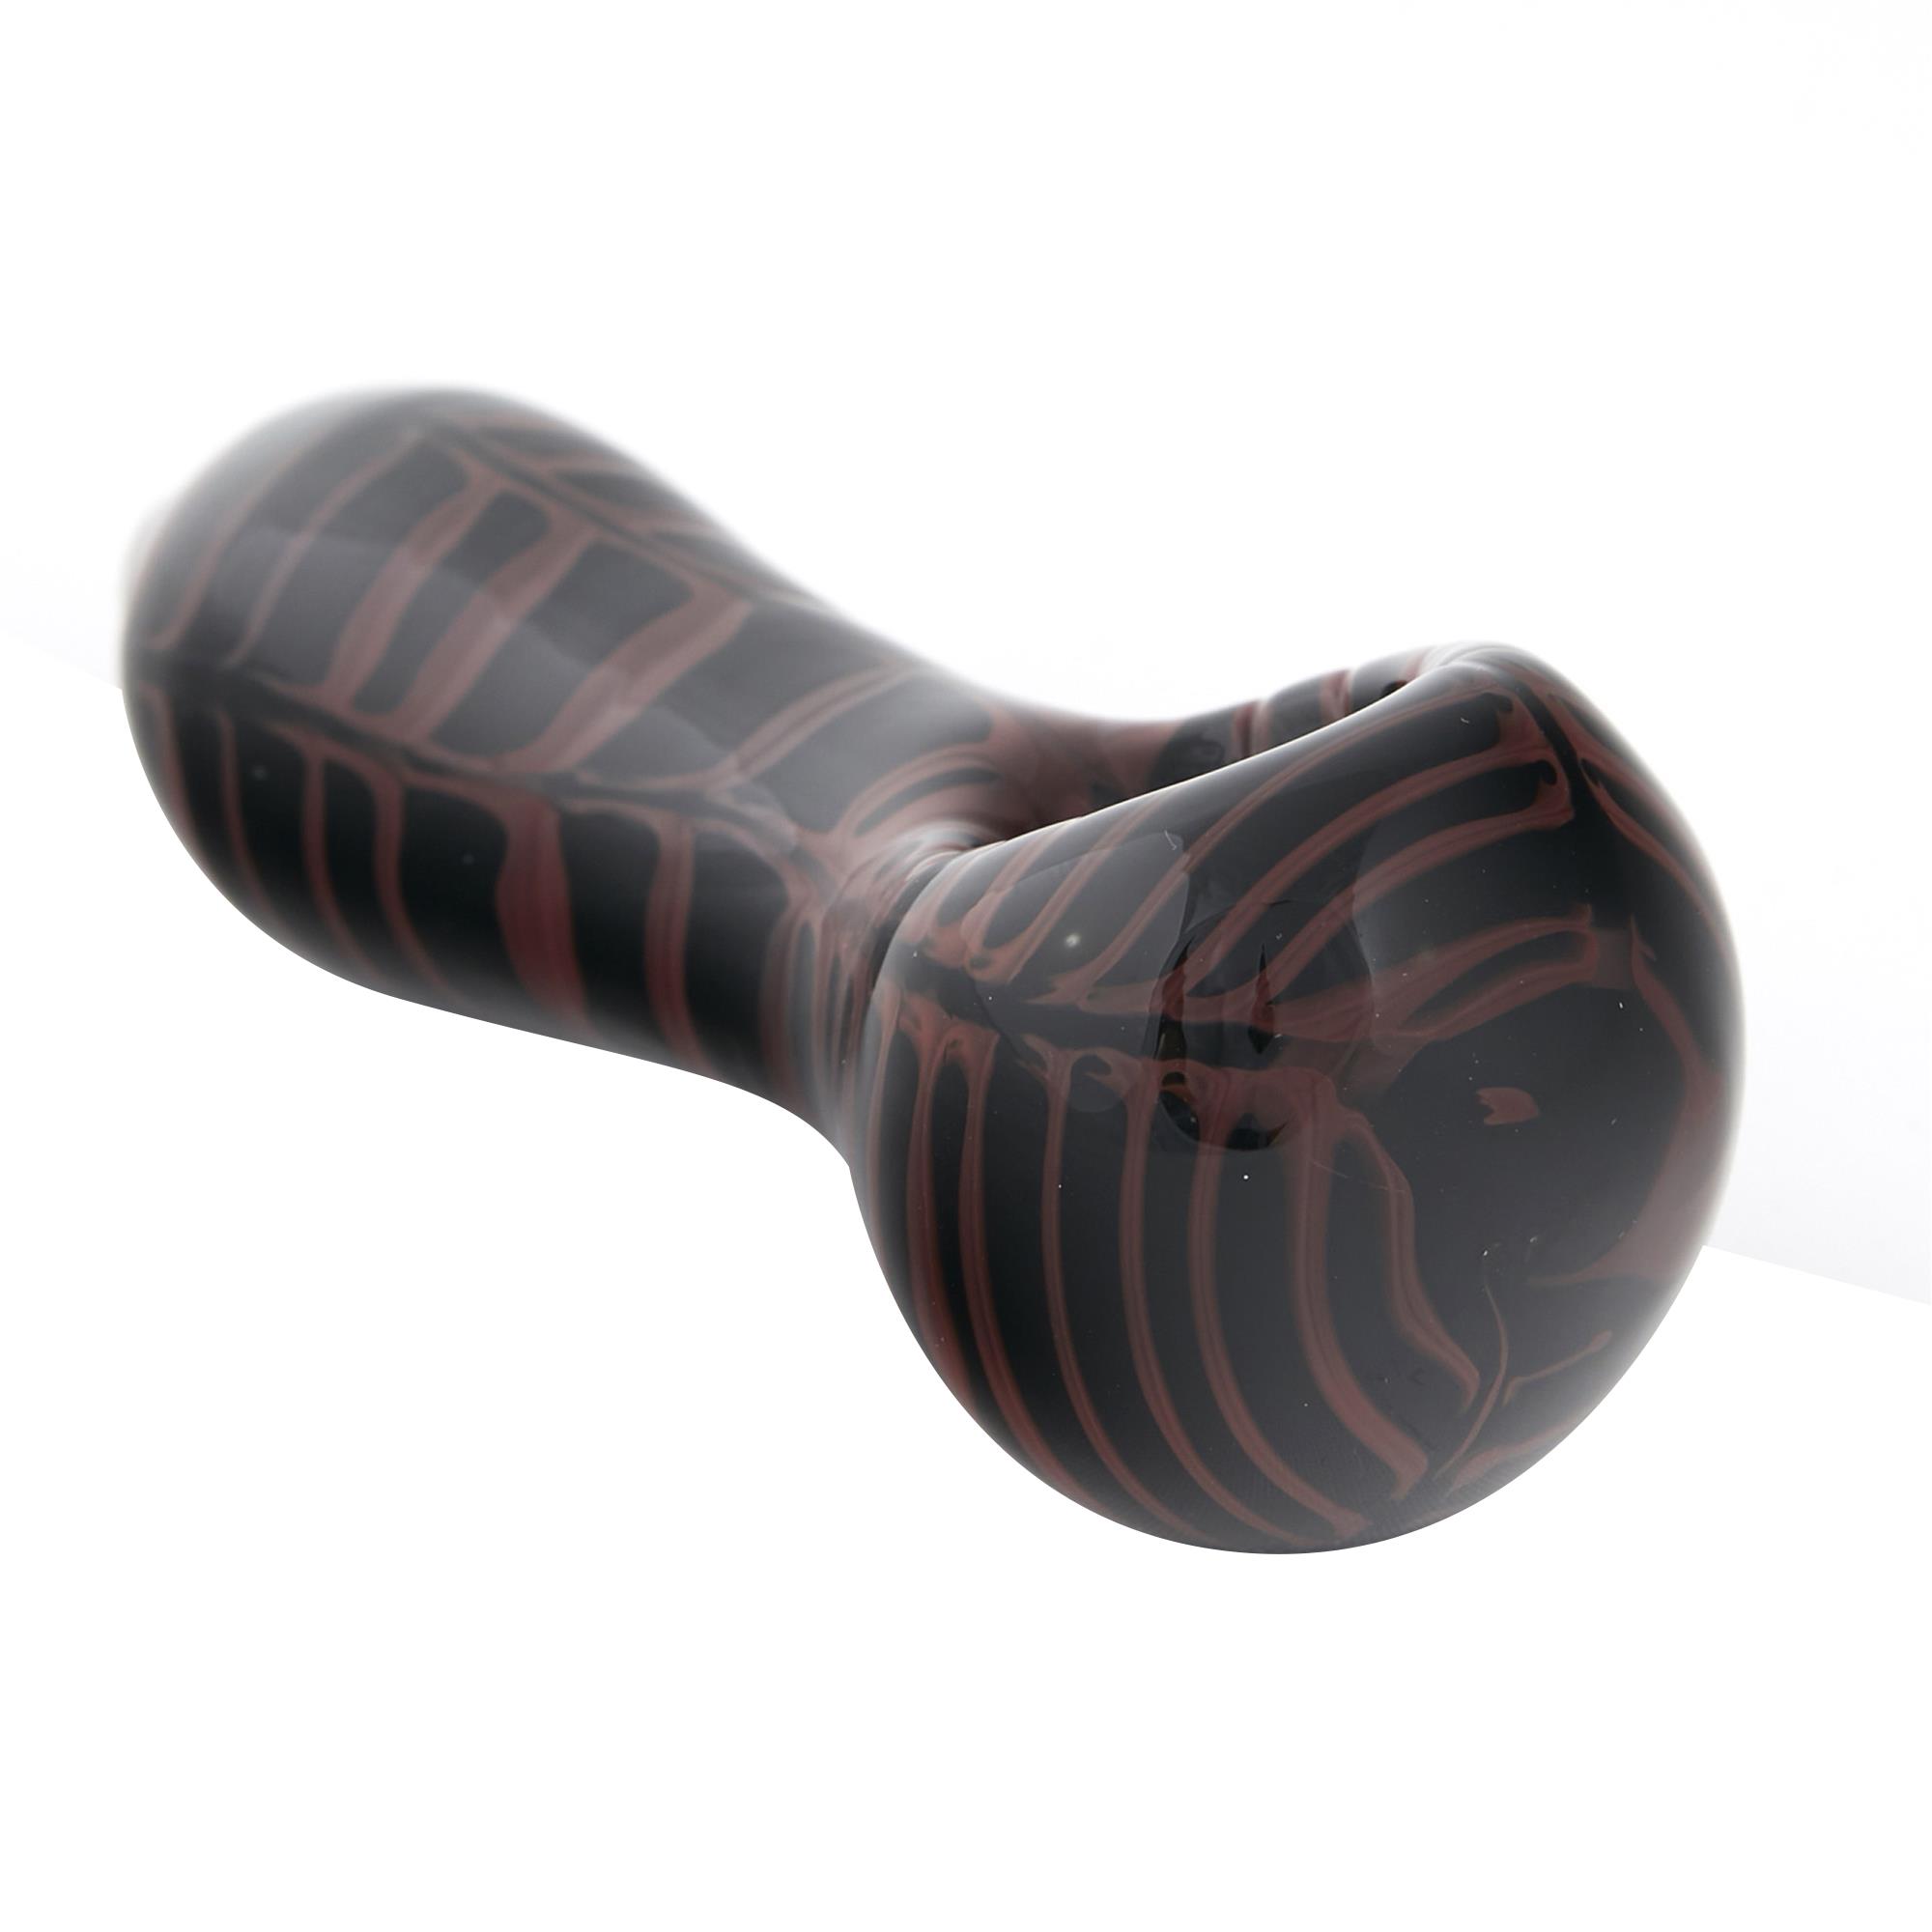 SITH LORD SPOON PIPE